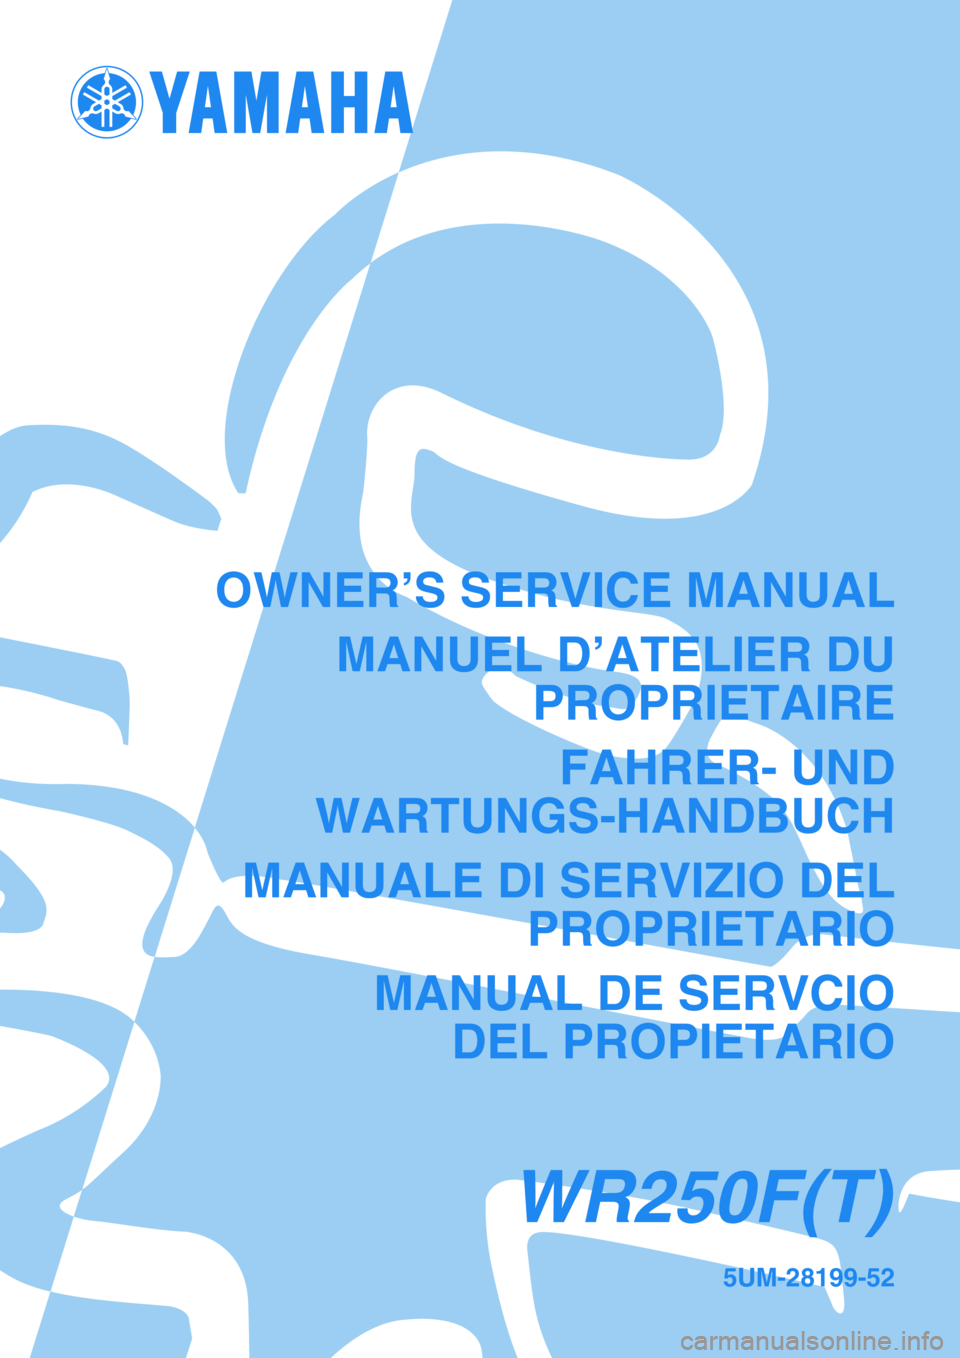 YAMAHA WR 250F 2005  Manuale duso (in Italian) 5UM-28199-52
WR250F(T)
OWNER’S SERVICE MANUAL
MANUEL D’ATELIER DU
PROPRIETAIRE
FAHRER- UND
WARTUNGS-HANDBUCH
MANUALE DI SERVIZIO DEL
PROPRIETARIO
MANUAL DE SERVCIO
DEL PROPIETARIO 